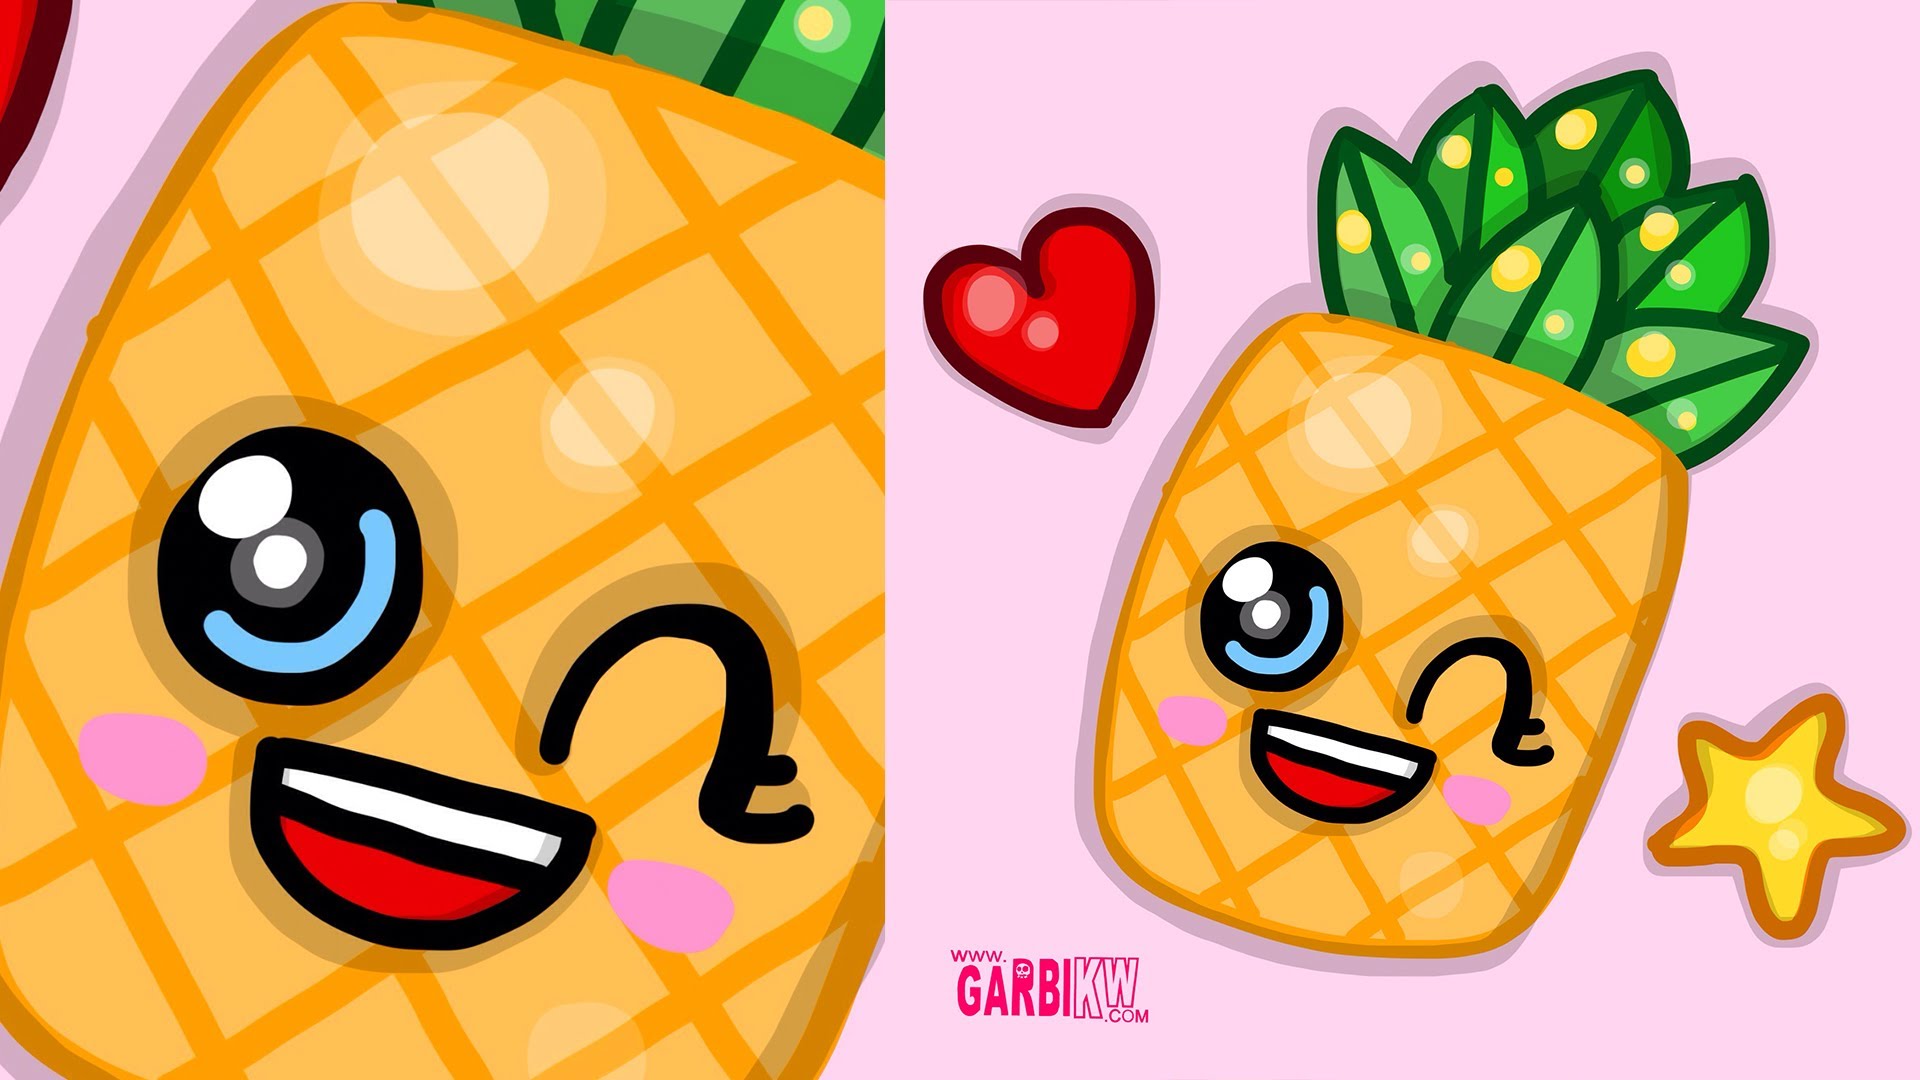 How To Draw A Kawaii Pineapple by Garbi KW - easy drawings - YouTube